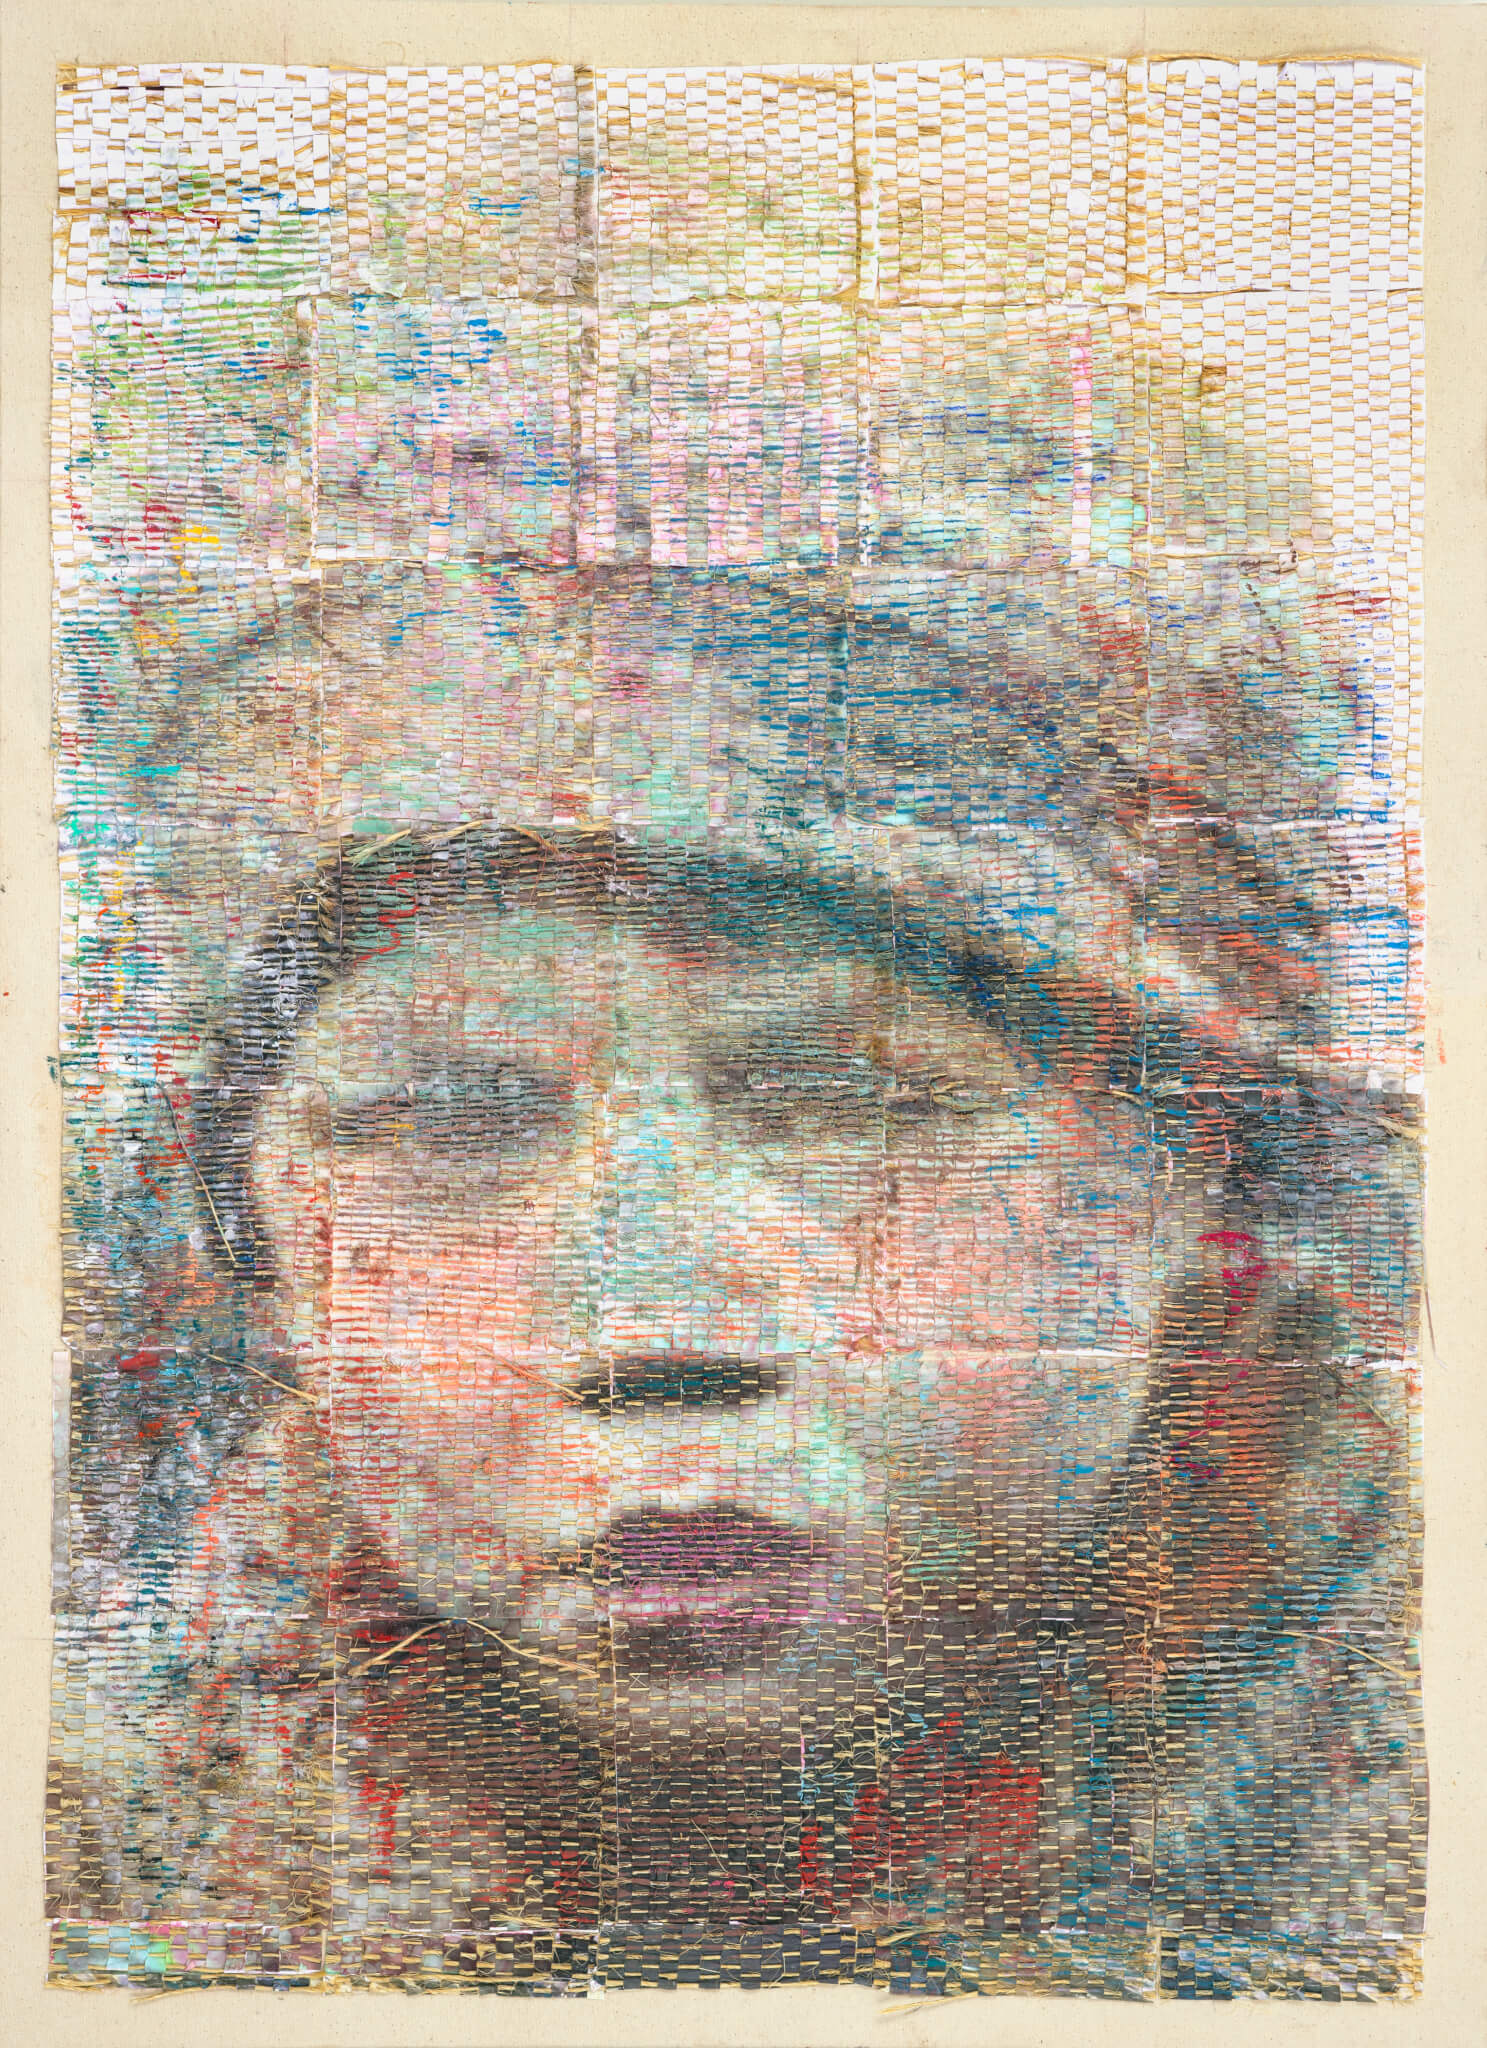 Hetty Baiz, Original Face 3, 2021, woven paper and jute, oil pastel, acrylic paint, ink, on canvas, 43 x 31 1/2